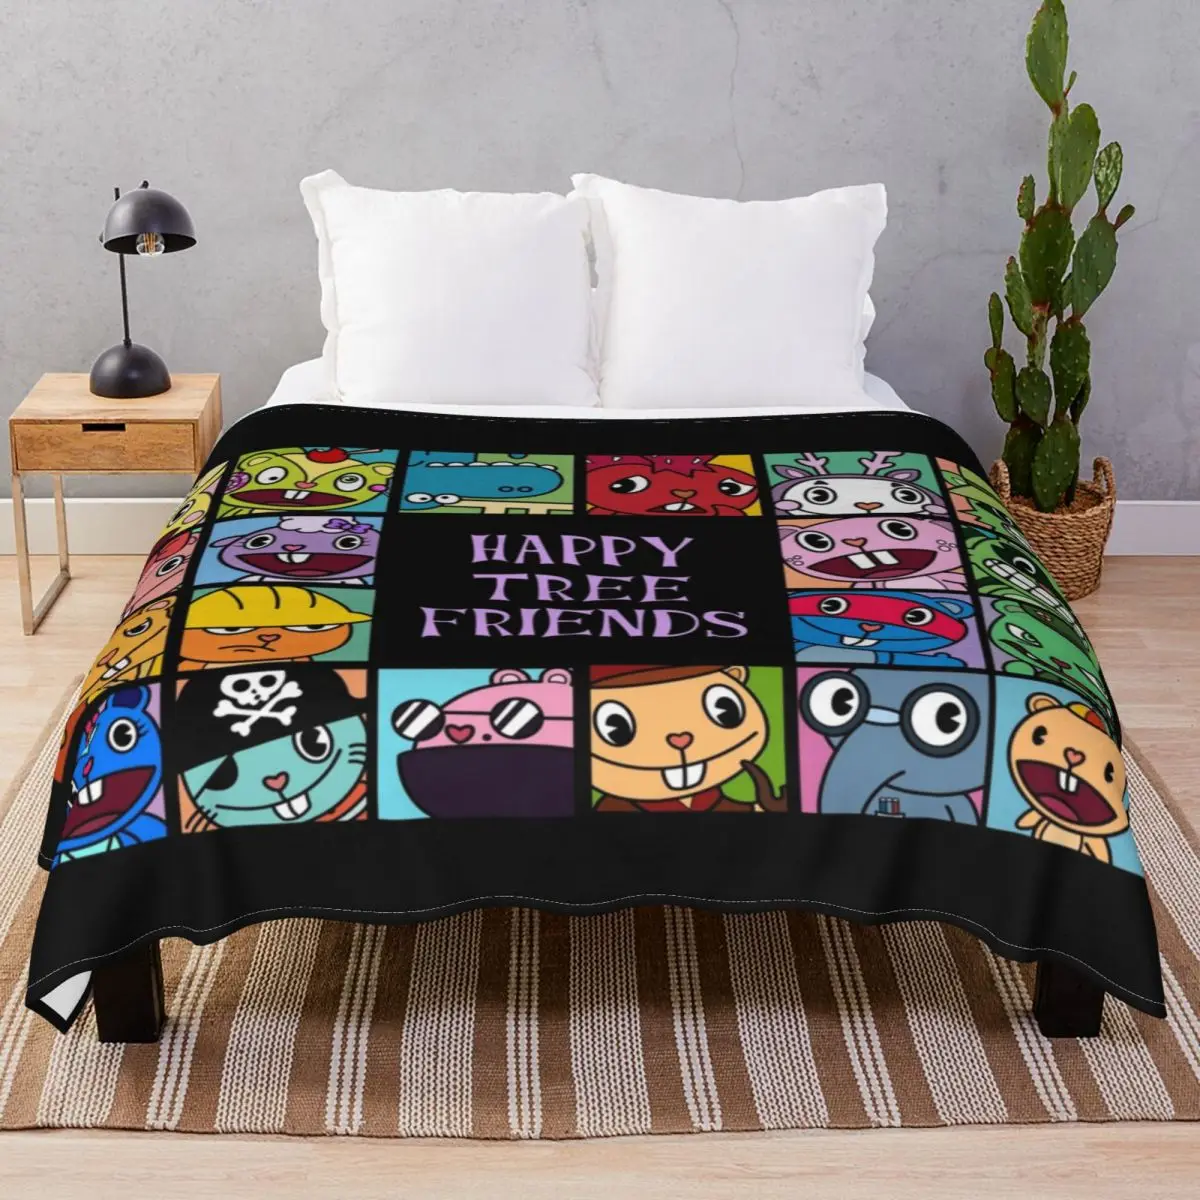 Happy Tree Friends Blankets Velvet Plush Decoration Fluffy Throw Blanket for Bedding Home Couch Camp Office